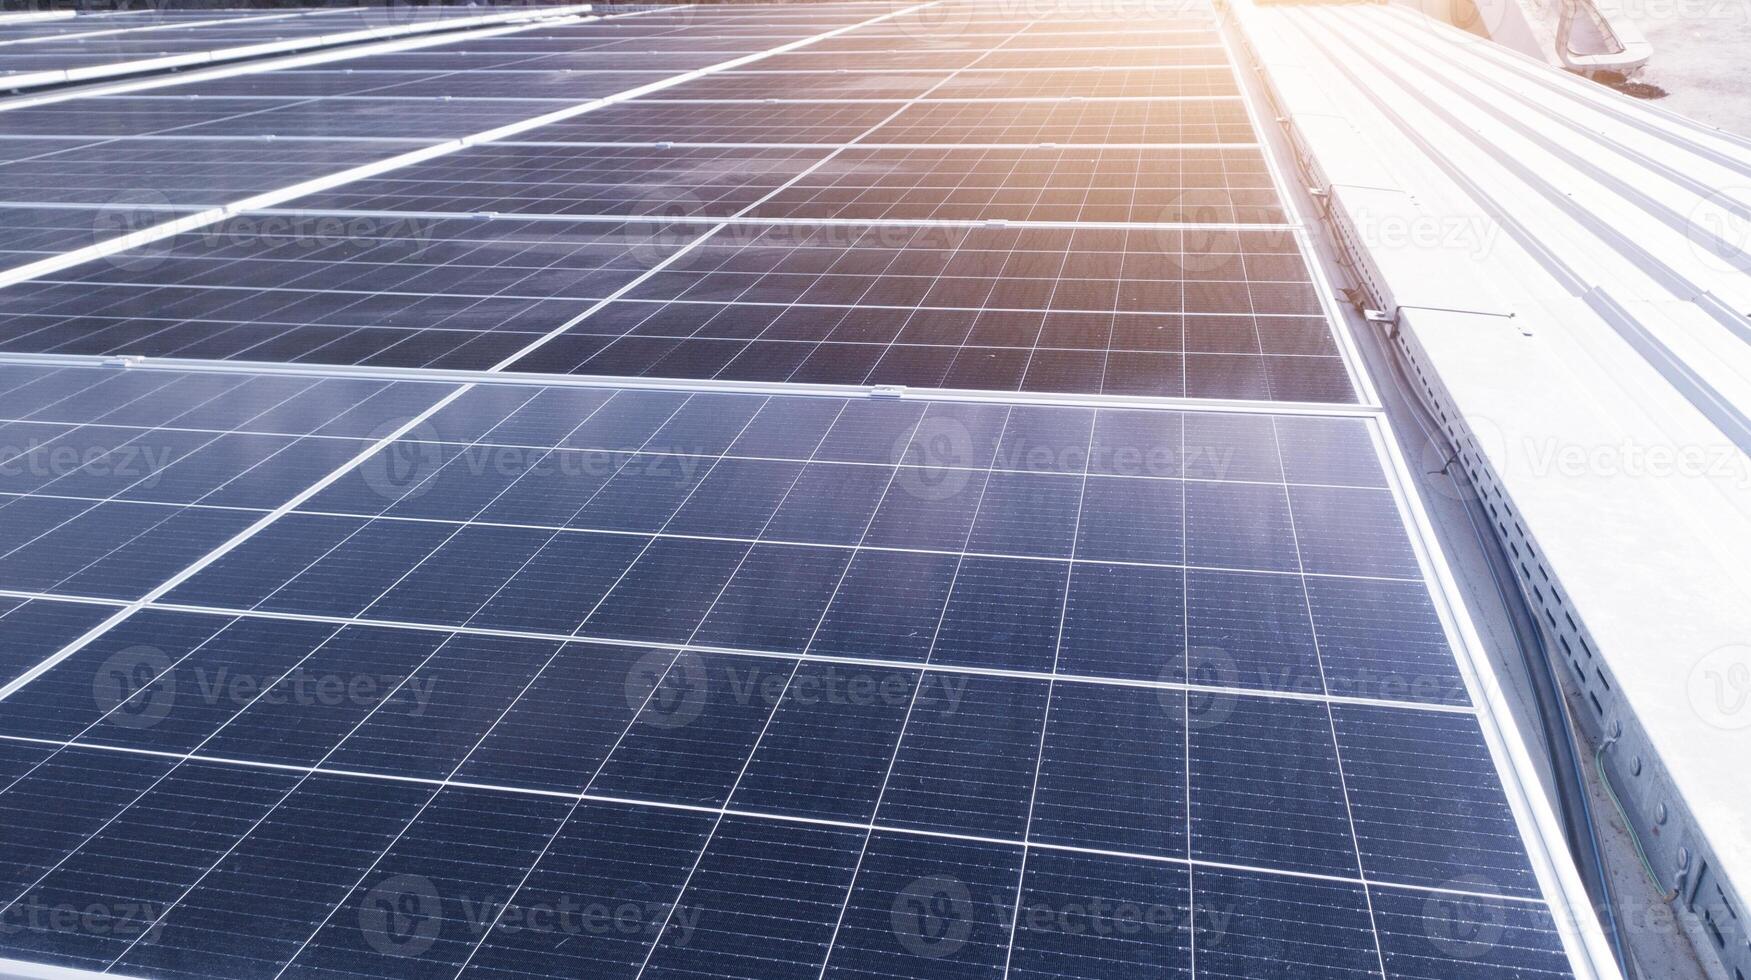 Photovoltaic solar panels mounted on building roof for producing clean ecological electricity at sunset.Photovoltaic panels on the roof.View of solar panels in the building,renewable energy concept photo